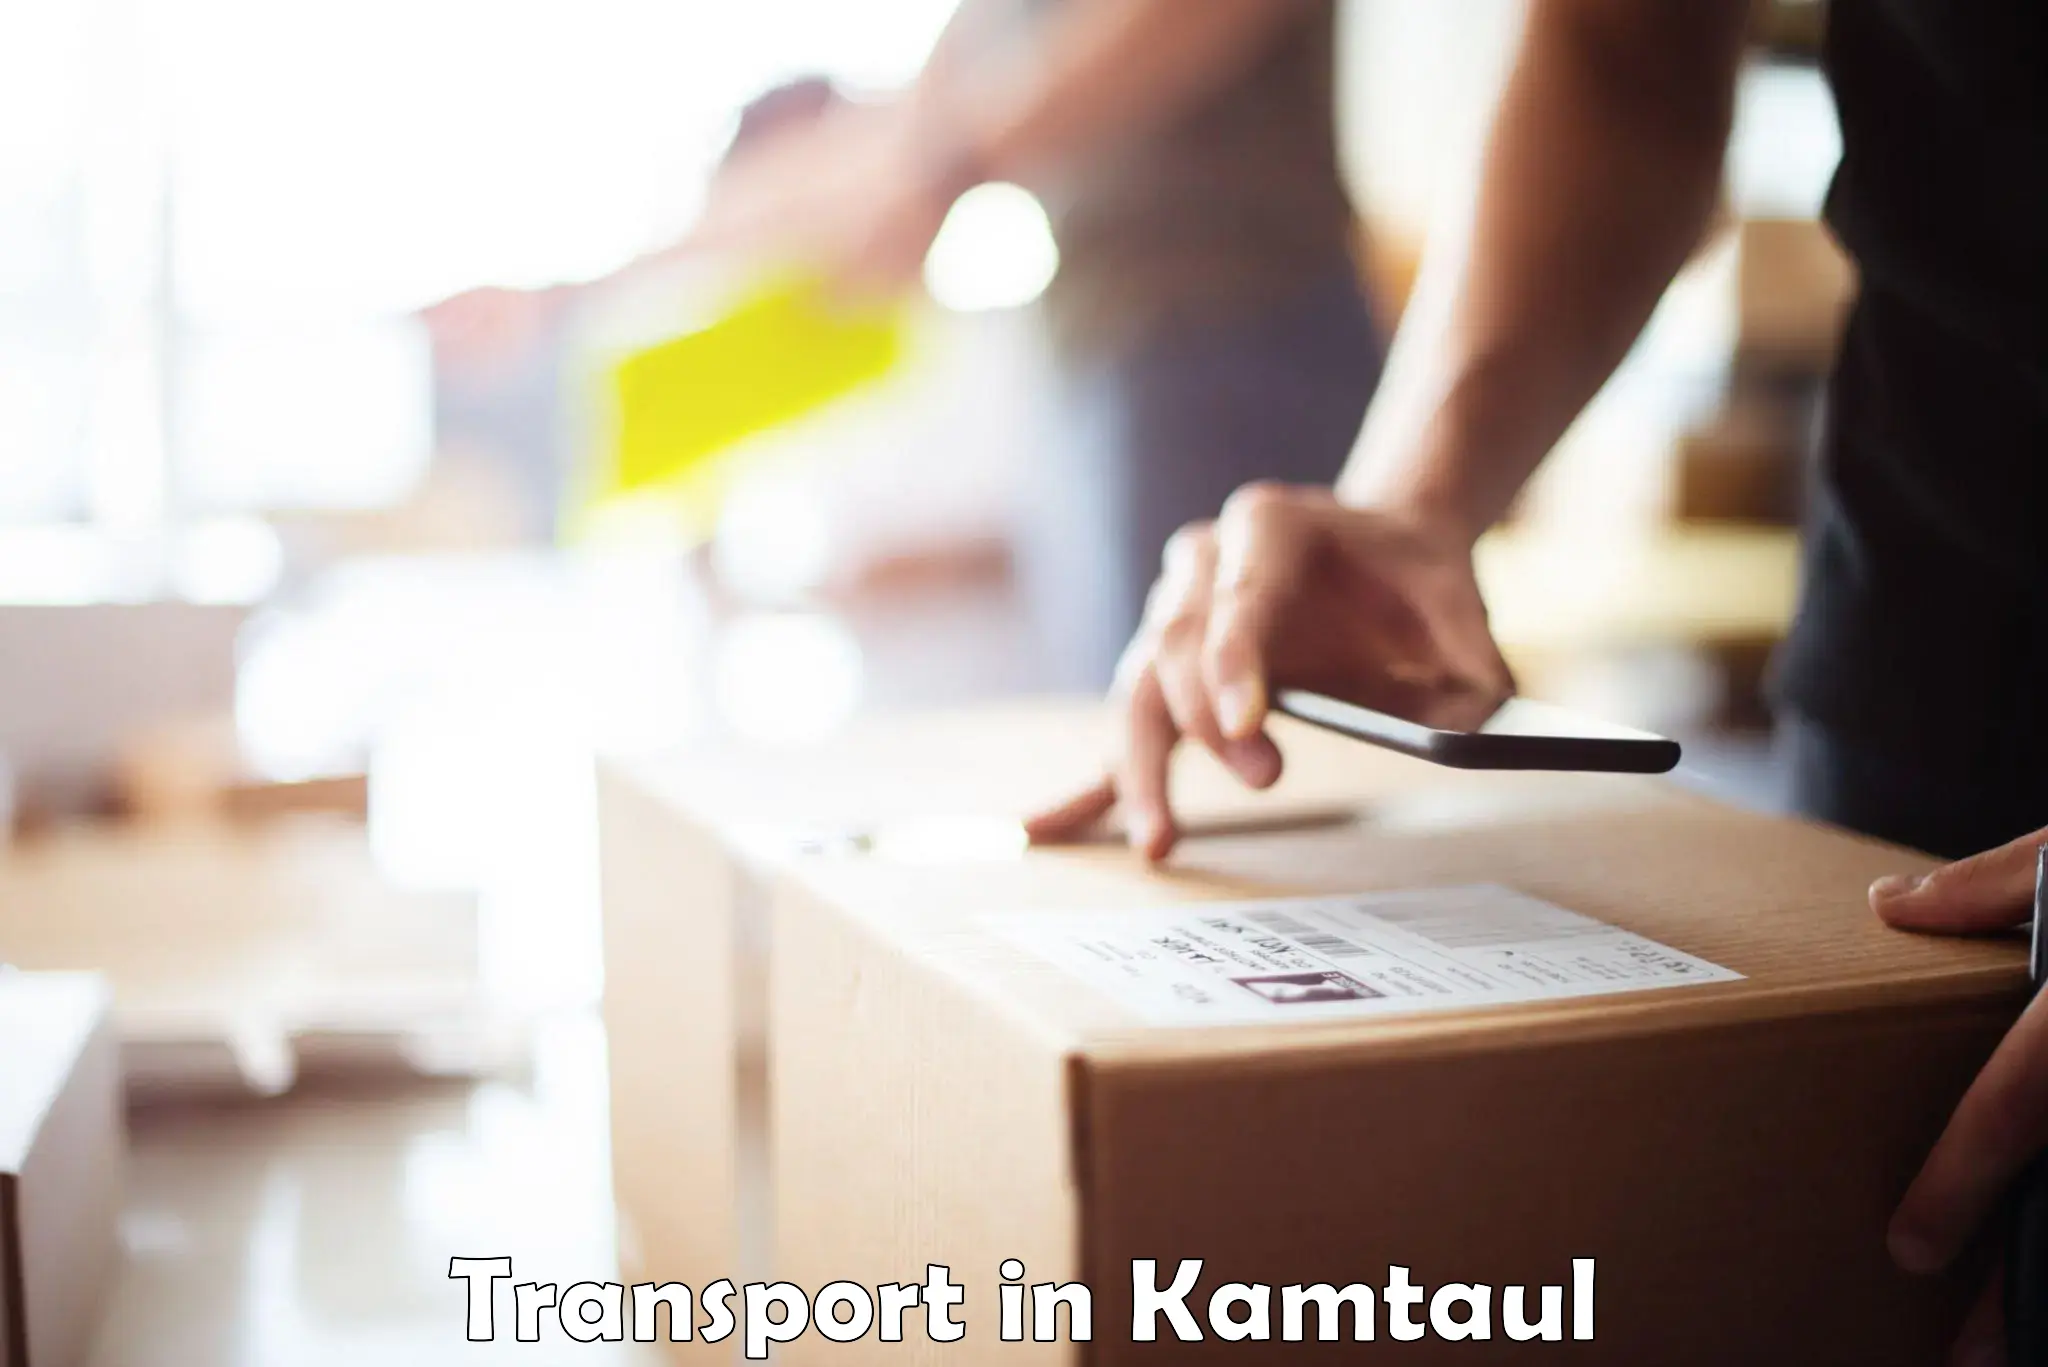 Express transport services in Kamtaul